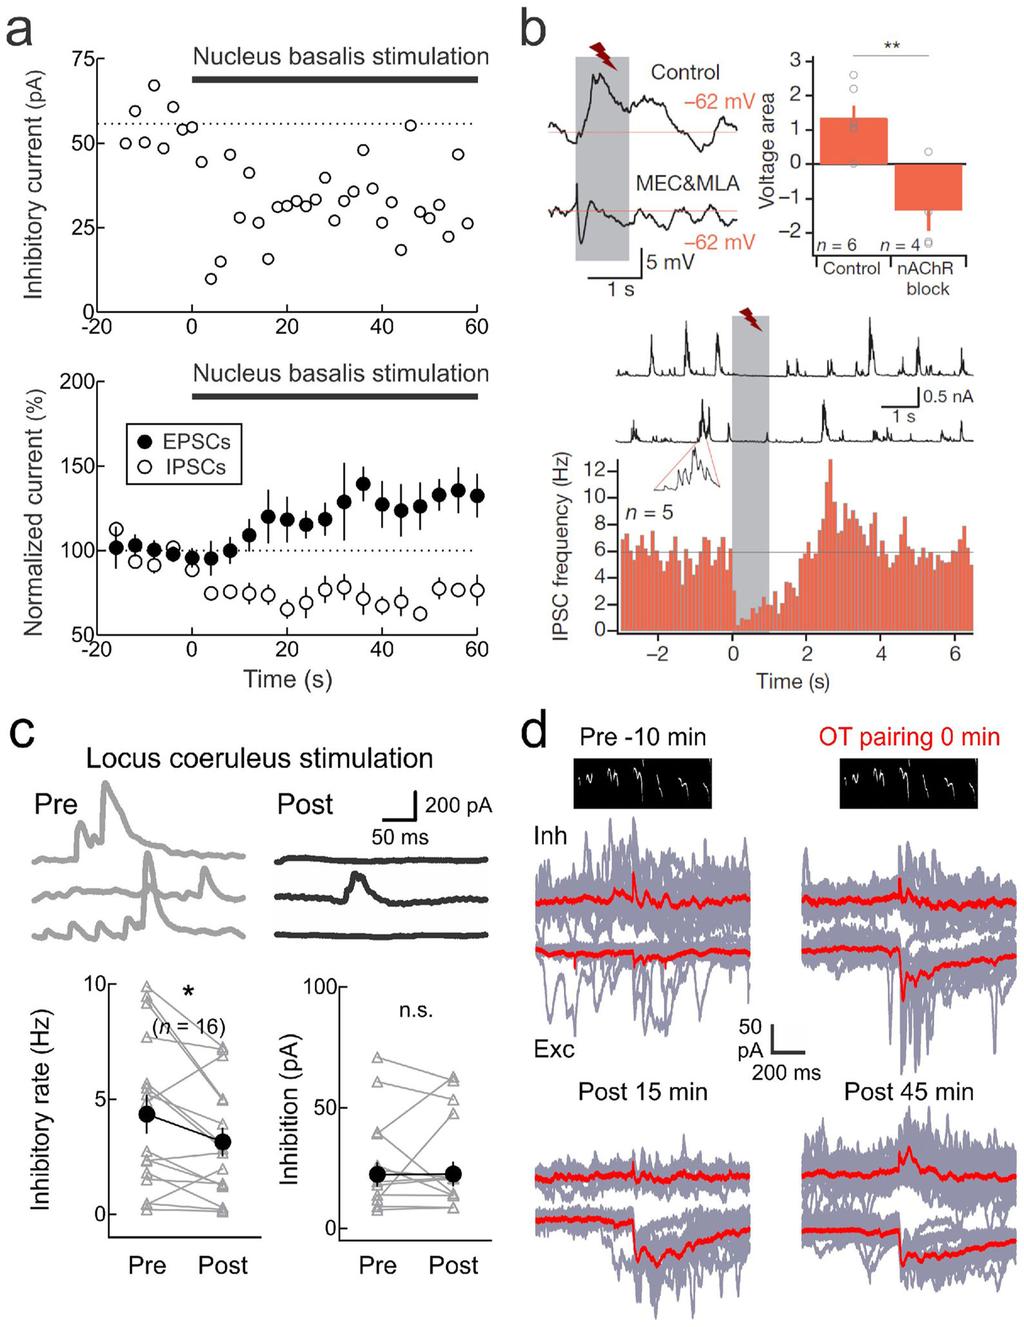 Froemke and Schreiner Page 26 Figure 5. Neuromodulation reduces AI inhibition. a, Nucleus basalis stimulation in adult rat AI rapidly reduces inhibition; excitation more slowly increases afterward.